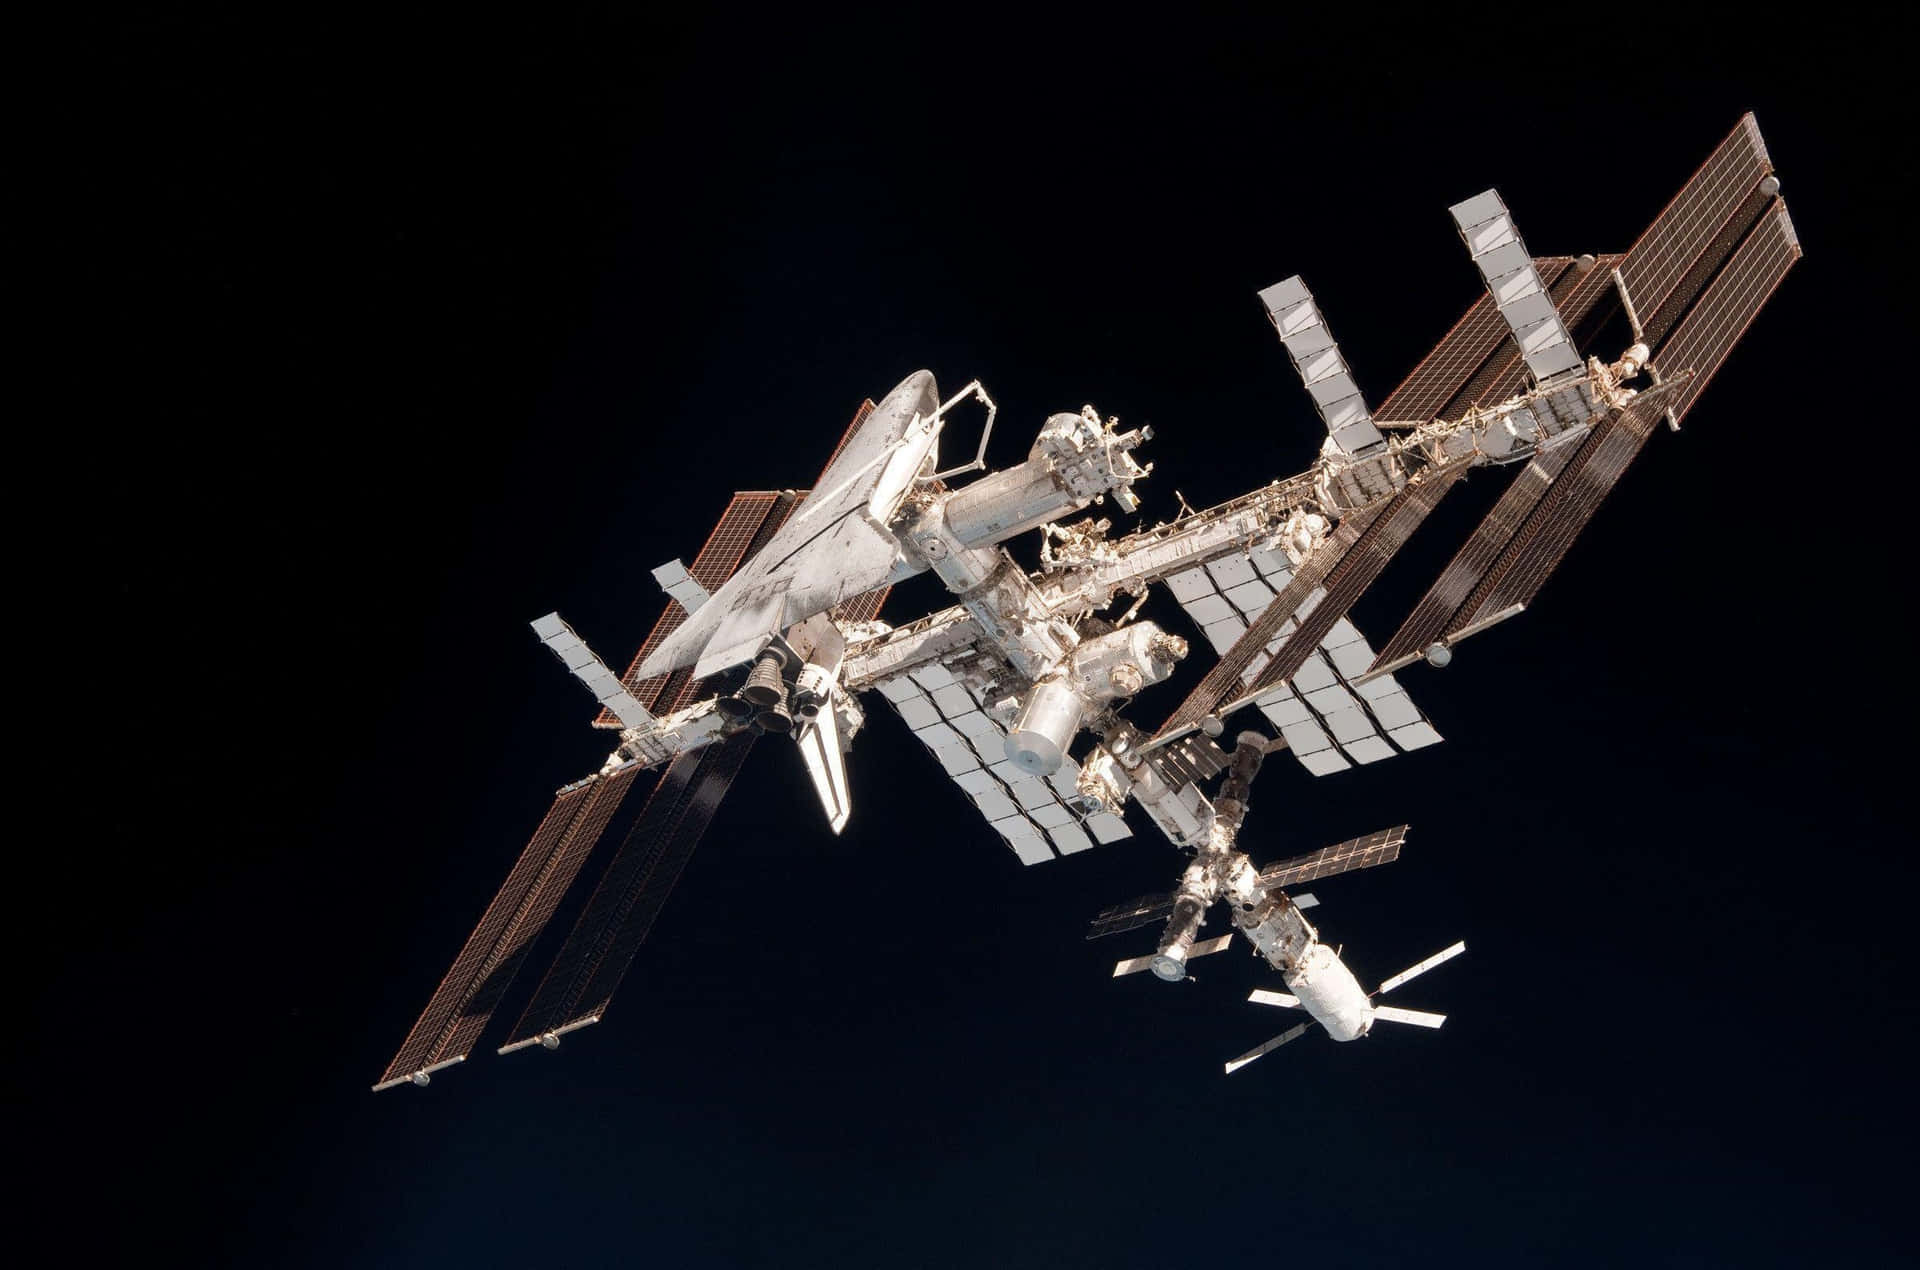 Awe-inspiring view of the International Space Station against the backdrop of Earth Wallpaper